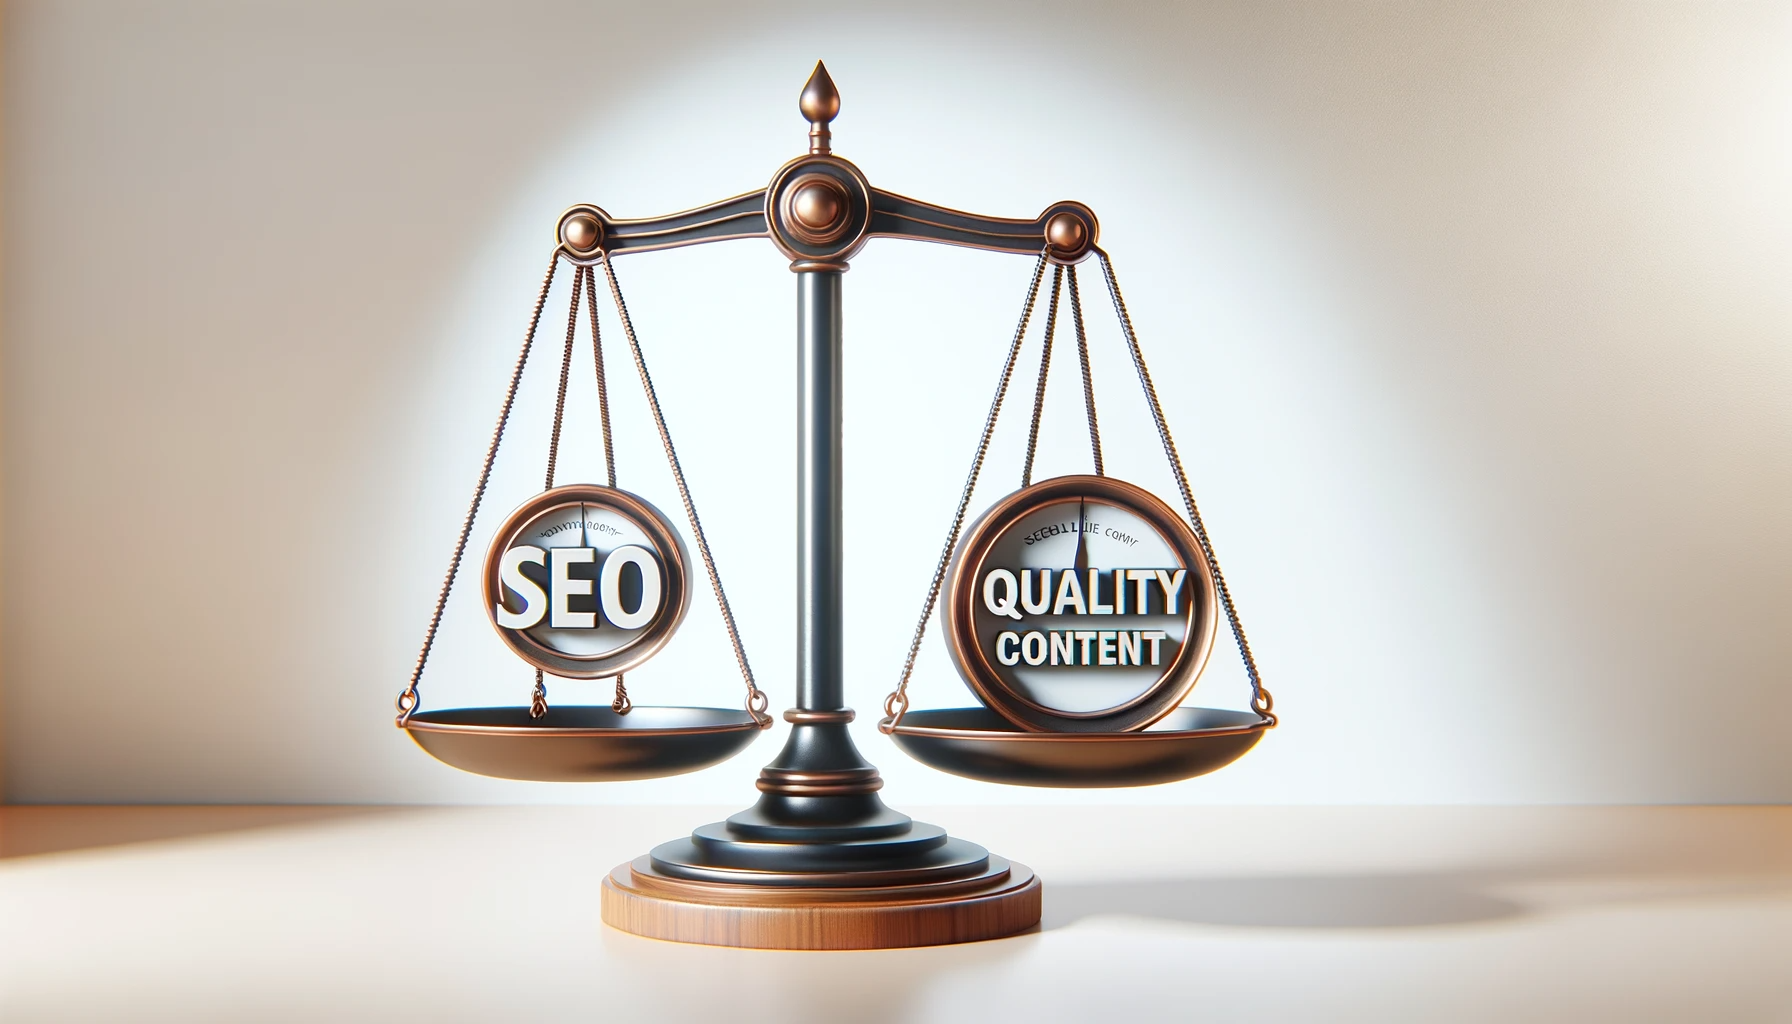 A balance scale with "SEO Content Keywords" on one side and "Quality Content" on the other